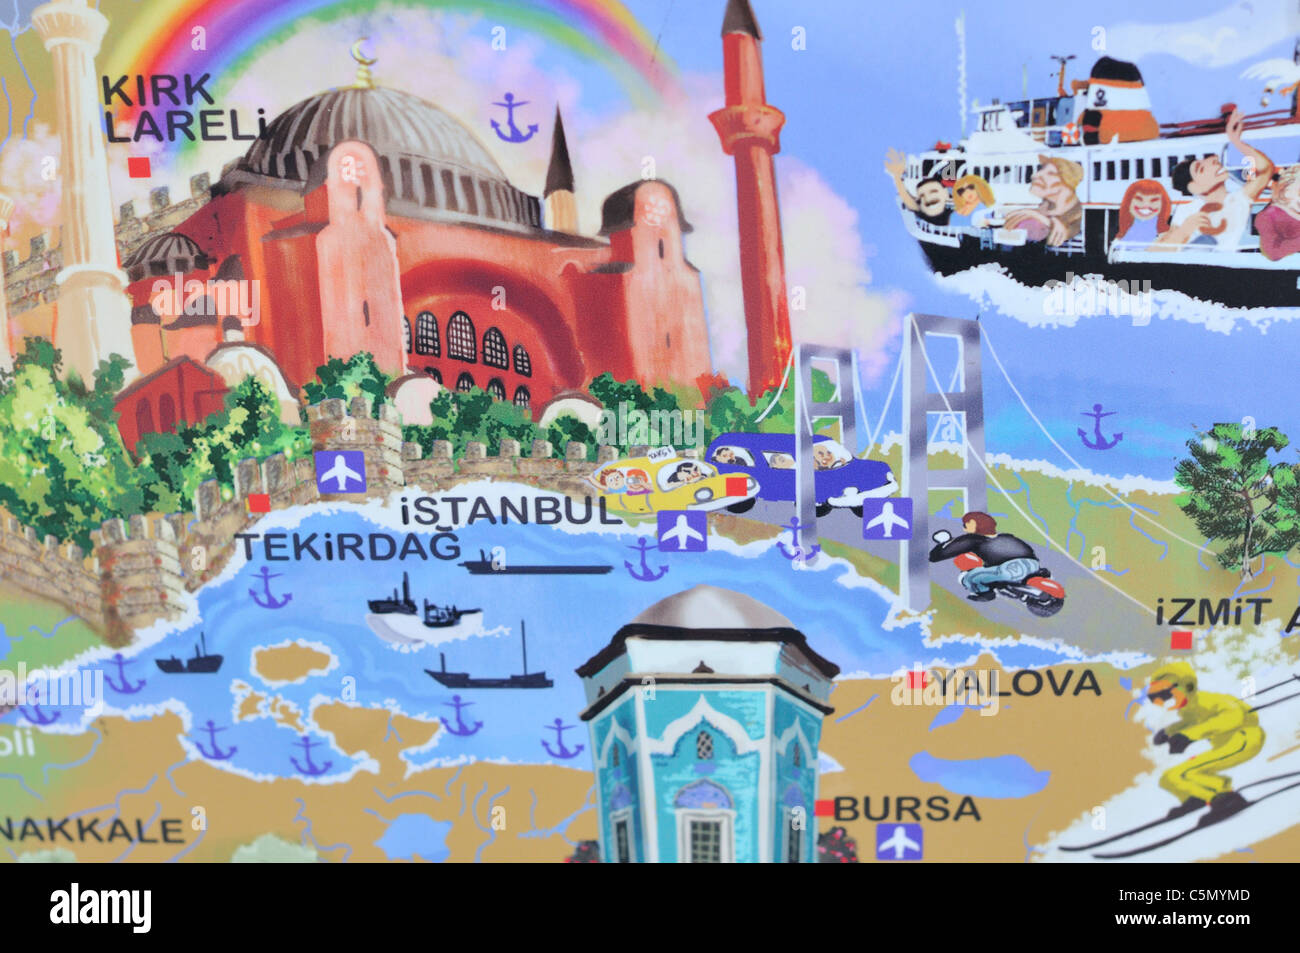 Poster showing tourist attractions in Turkey Stock Photo